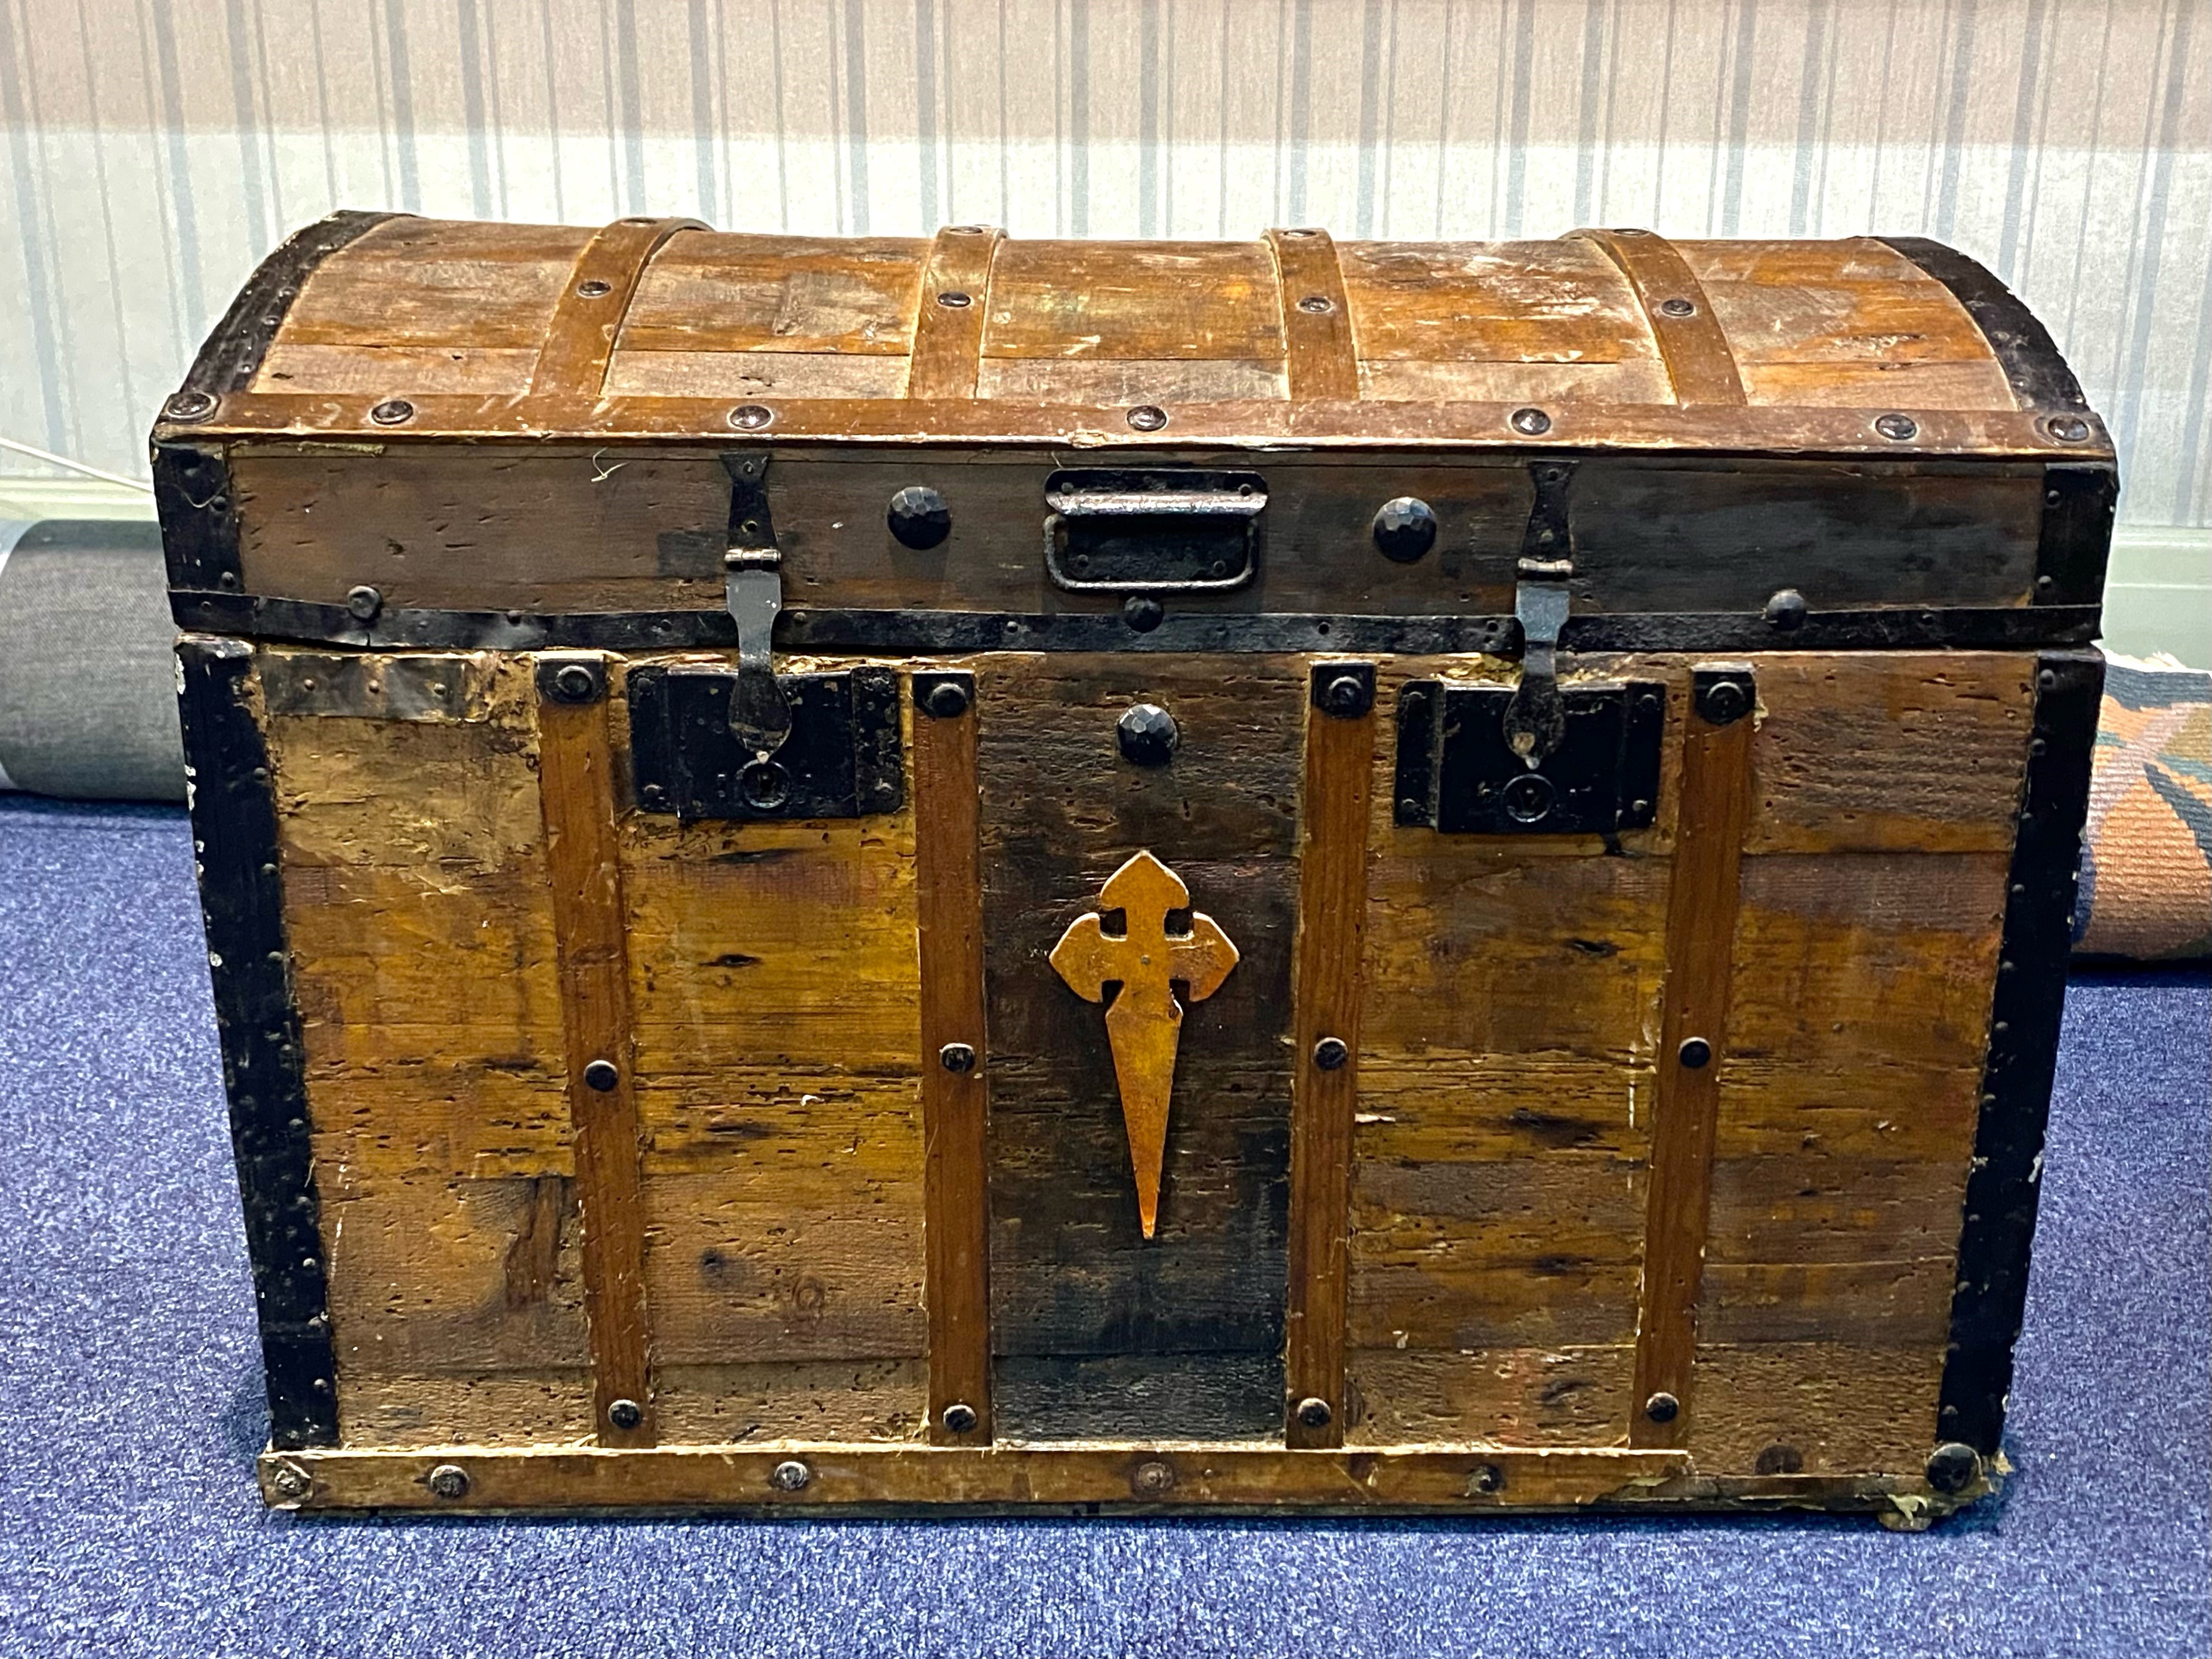 Large Wooden Metal Bound Trunk, with a collection of small rugs. Trunk full of small rugs, various - Image 2 of 5